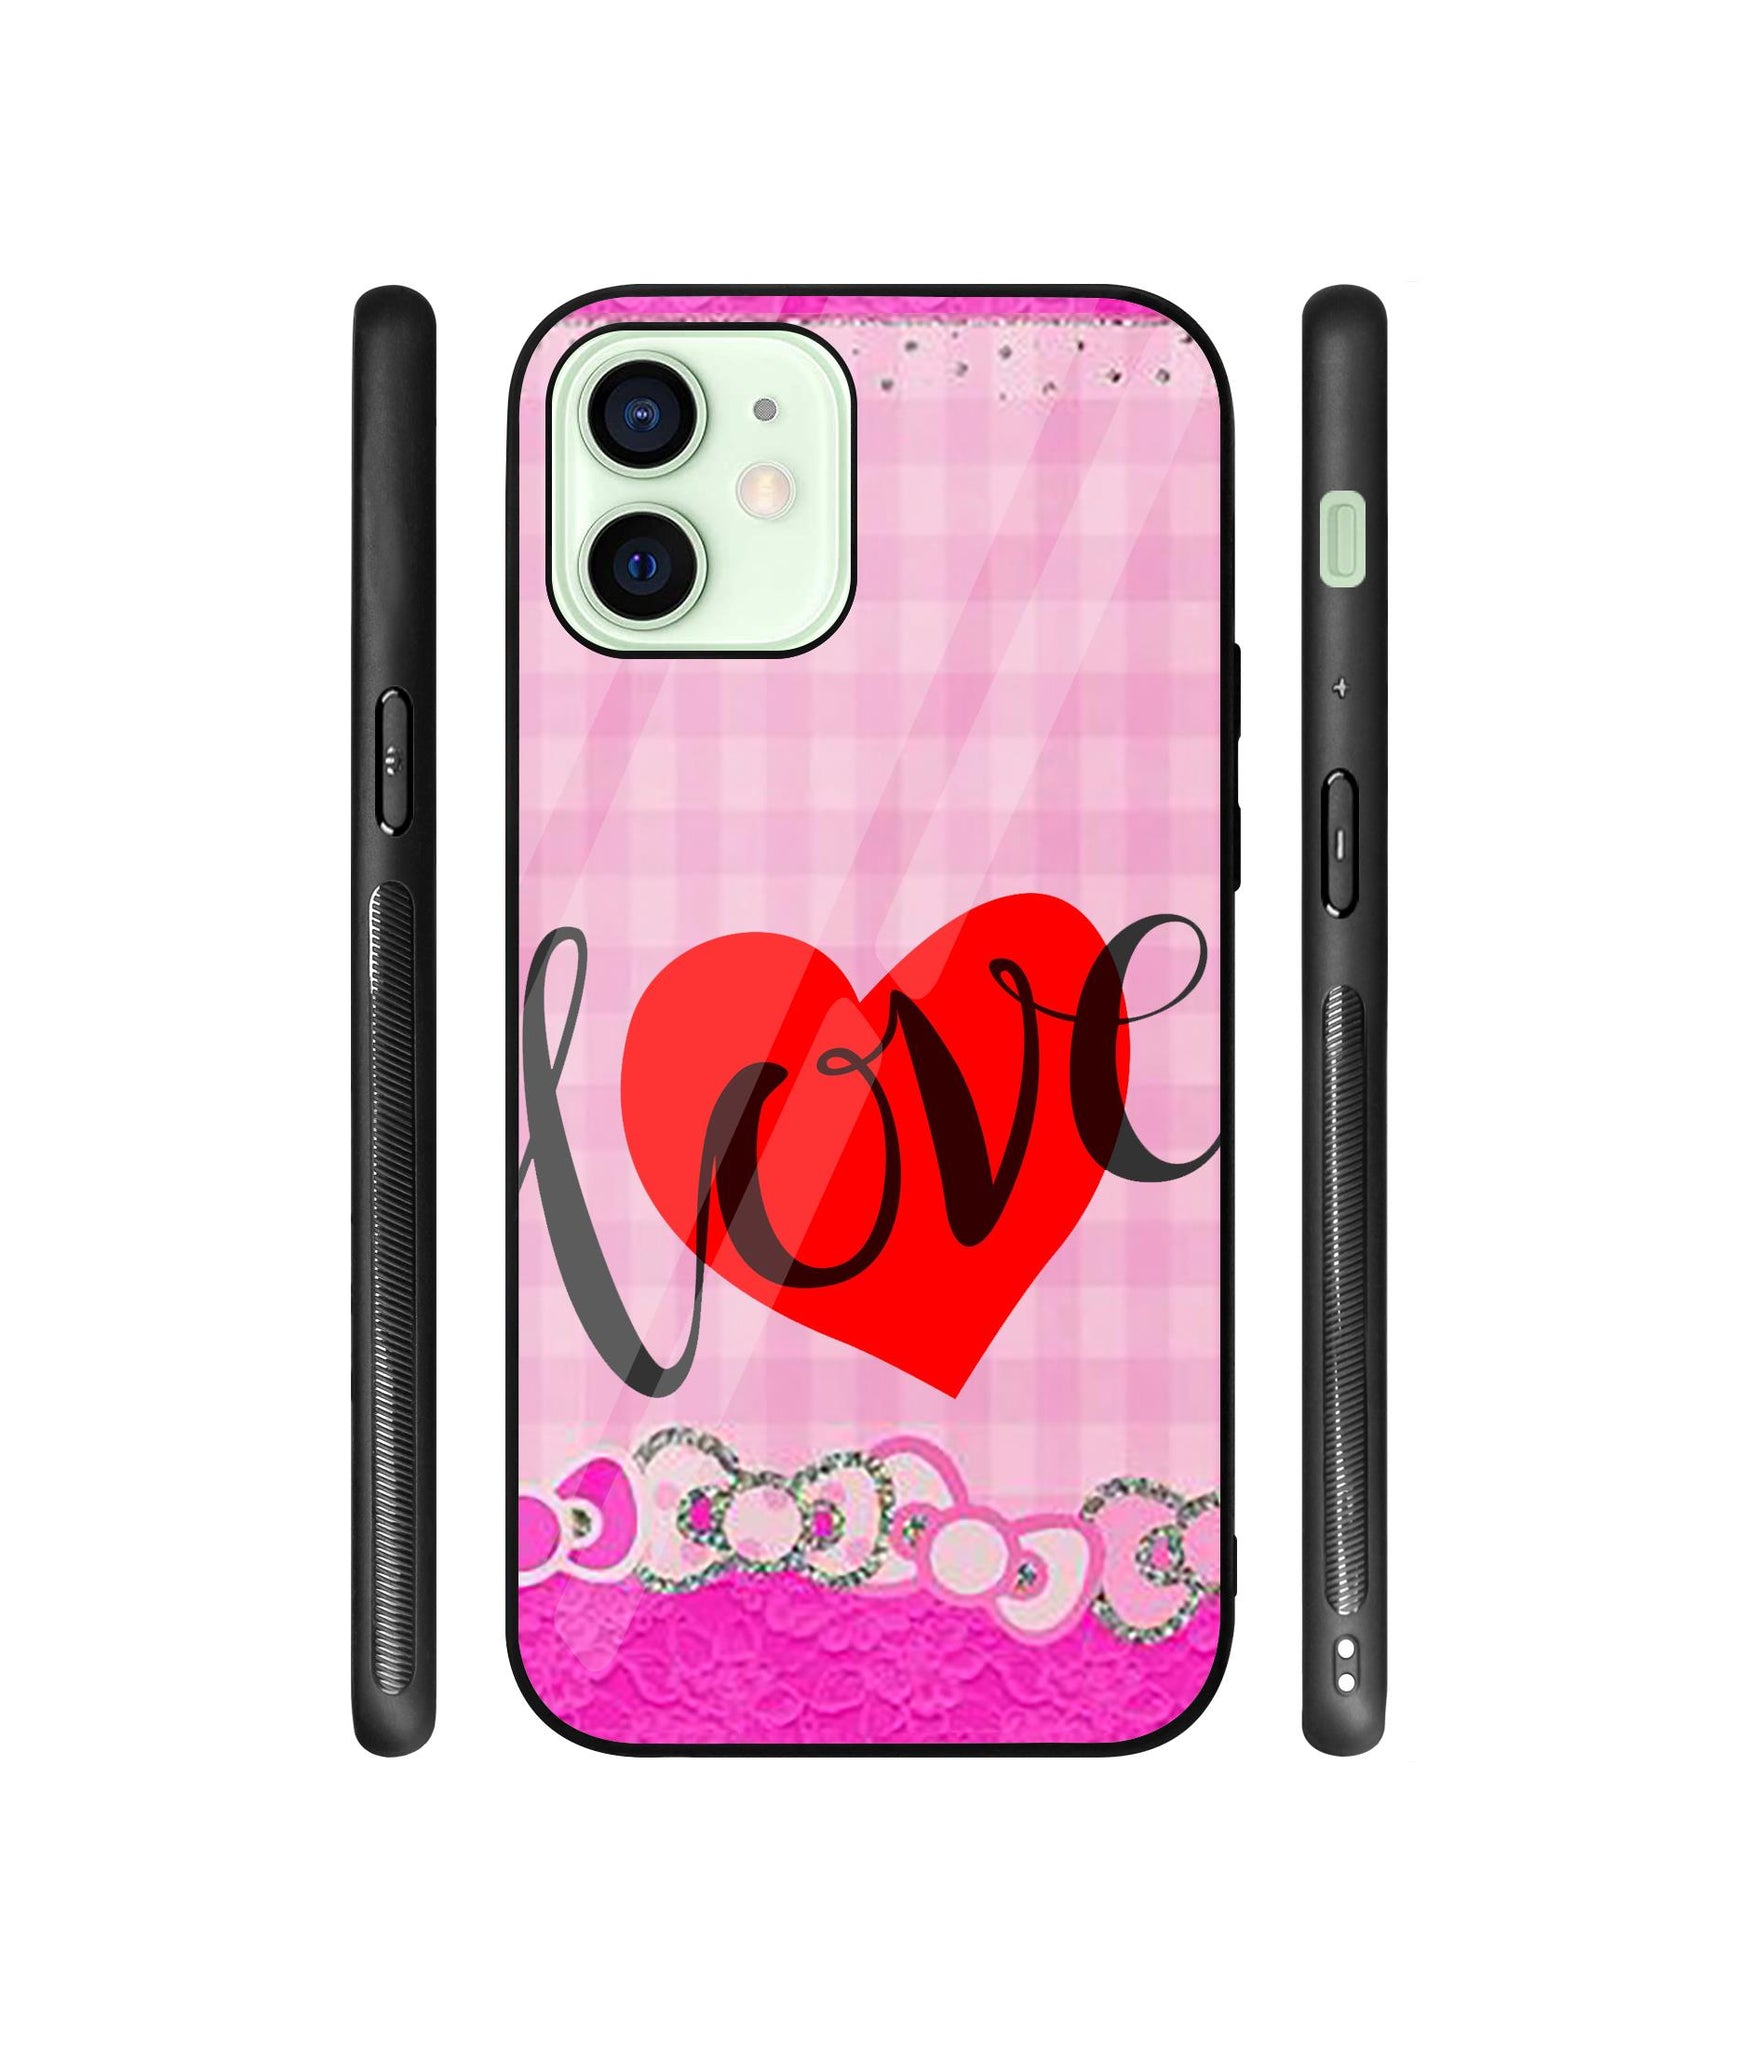 Love Print On Cloth Designer Printed Glass Cover for Apple iPhone 12 Mini